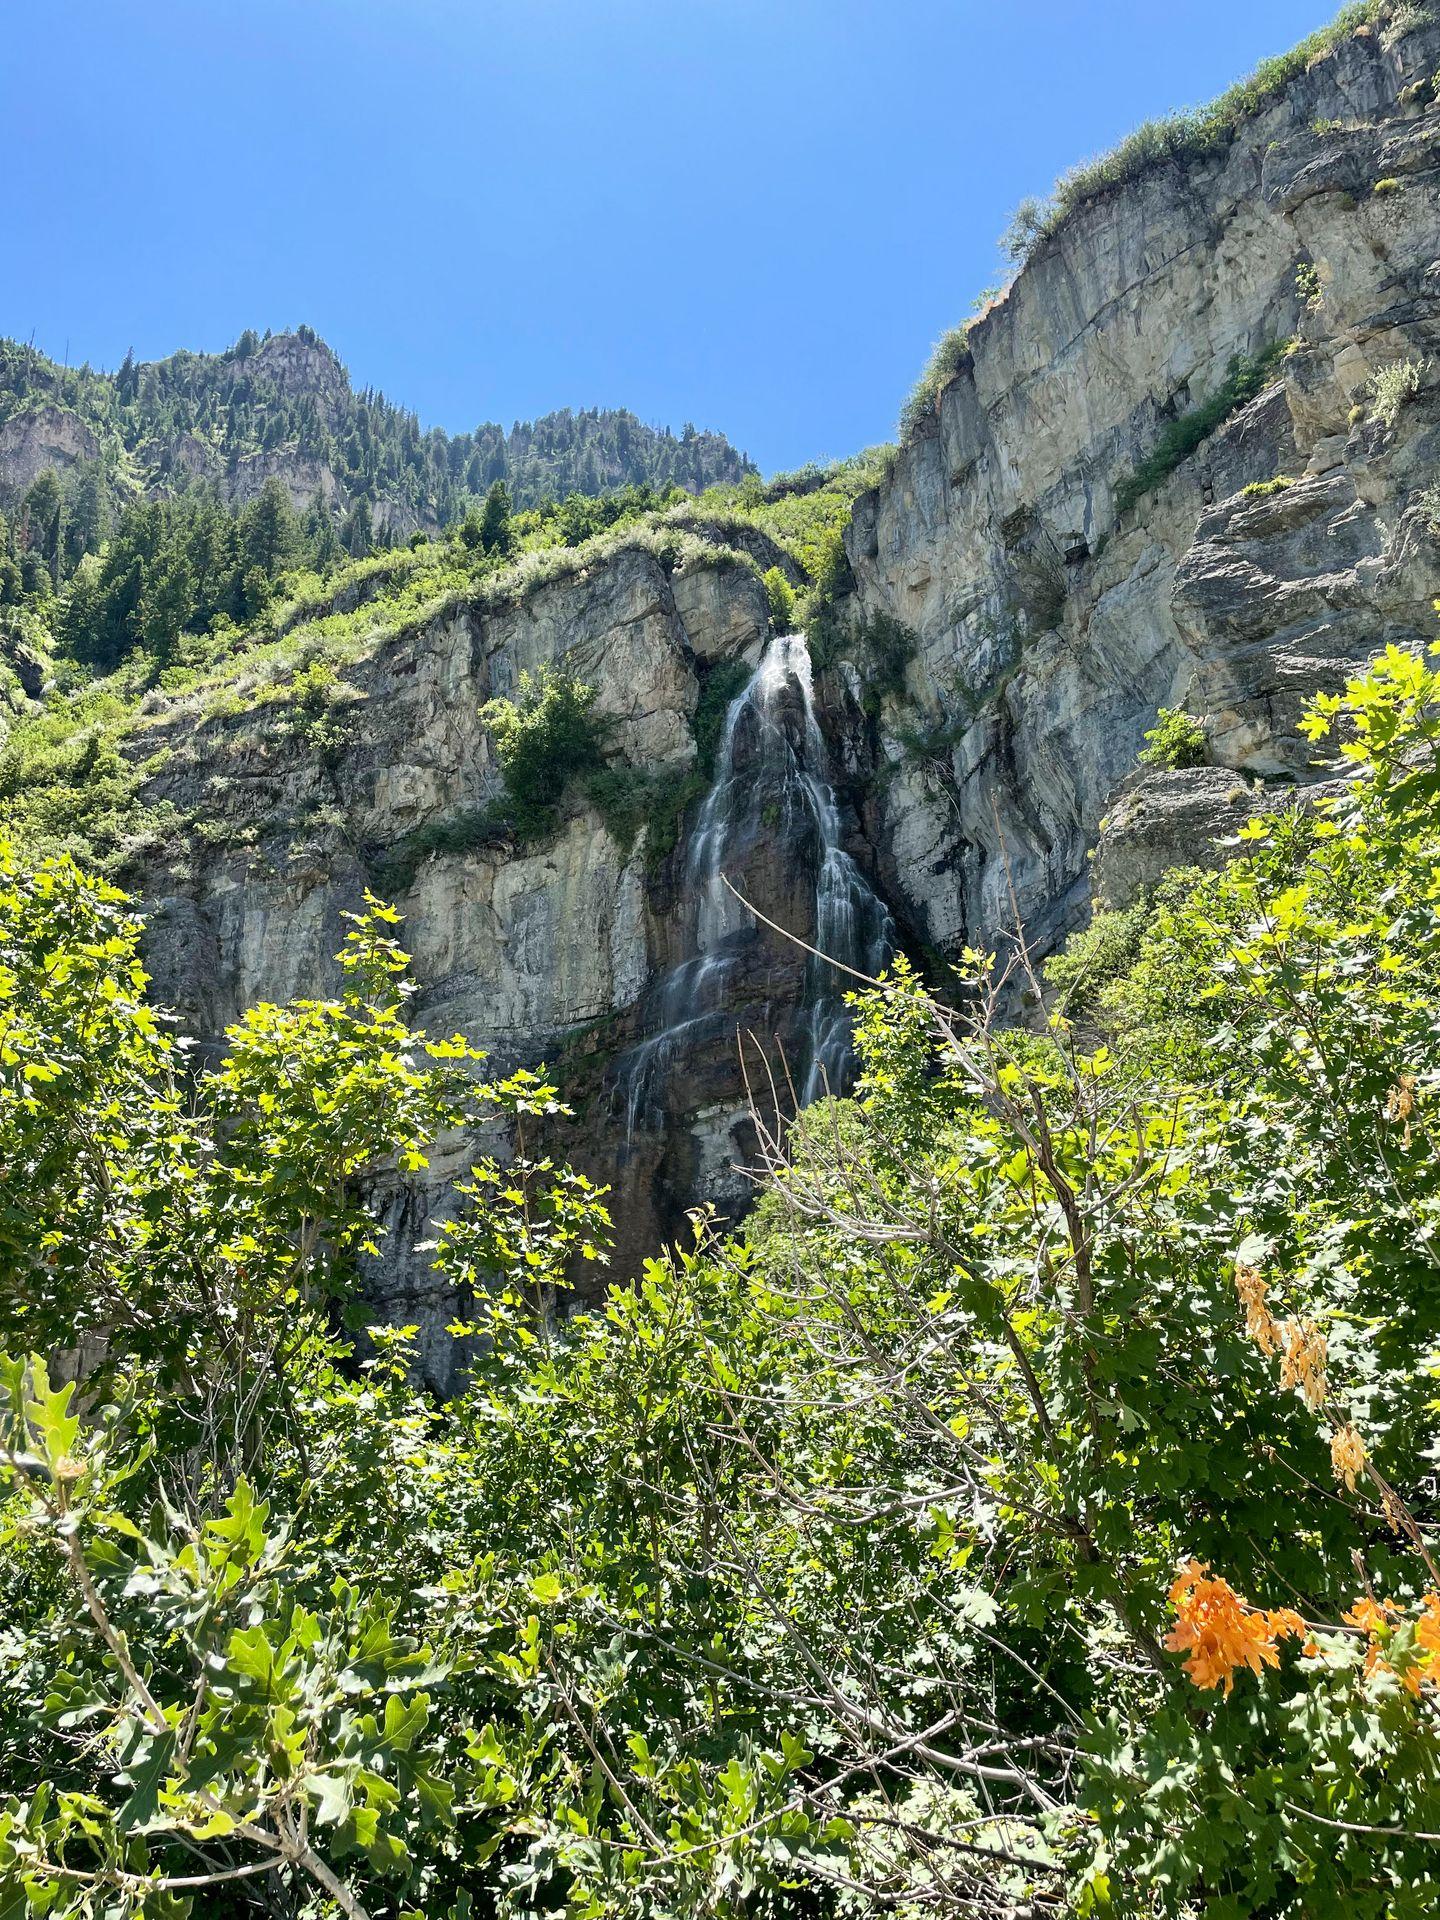 A view of the top of Stewart Falls with some trees in the foreground.